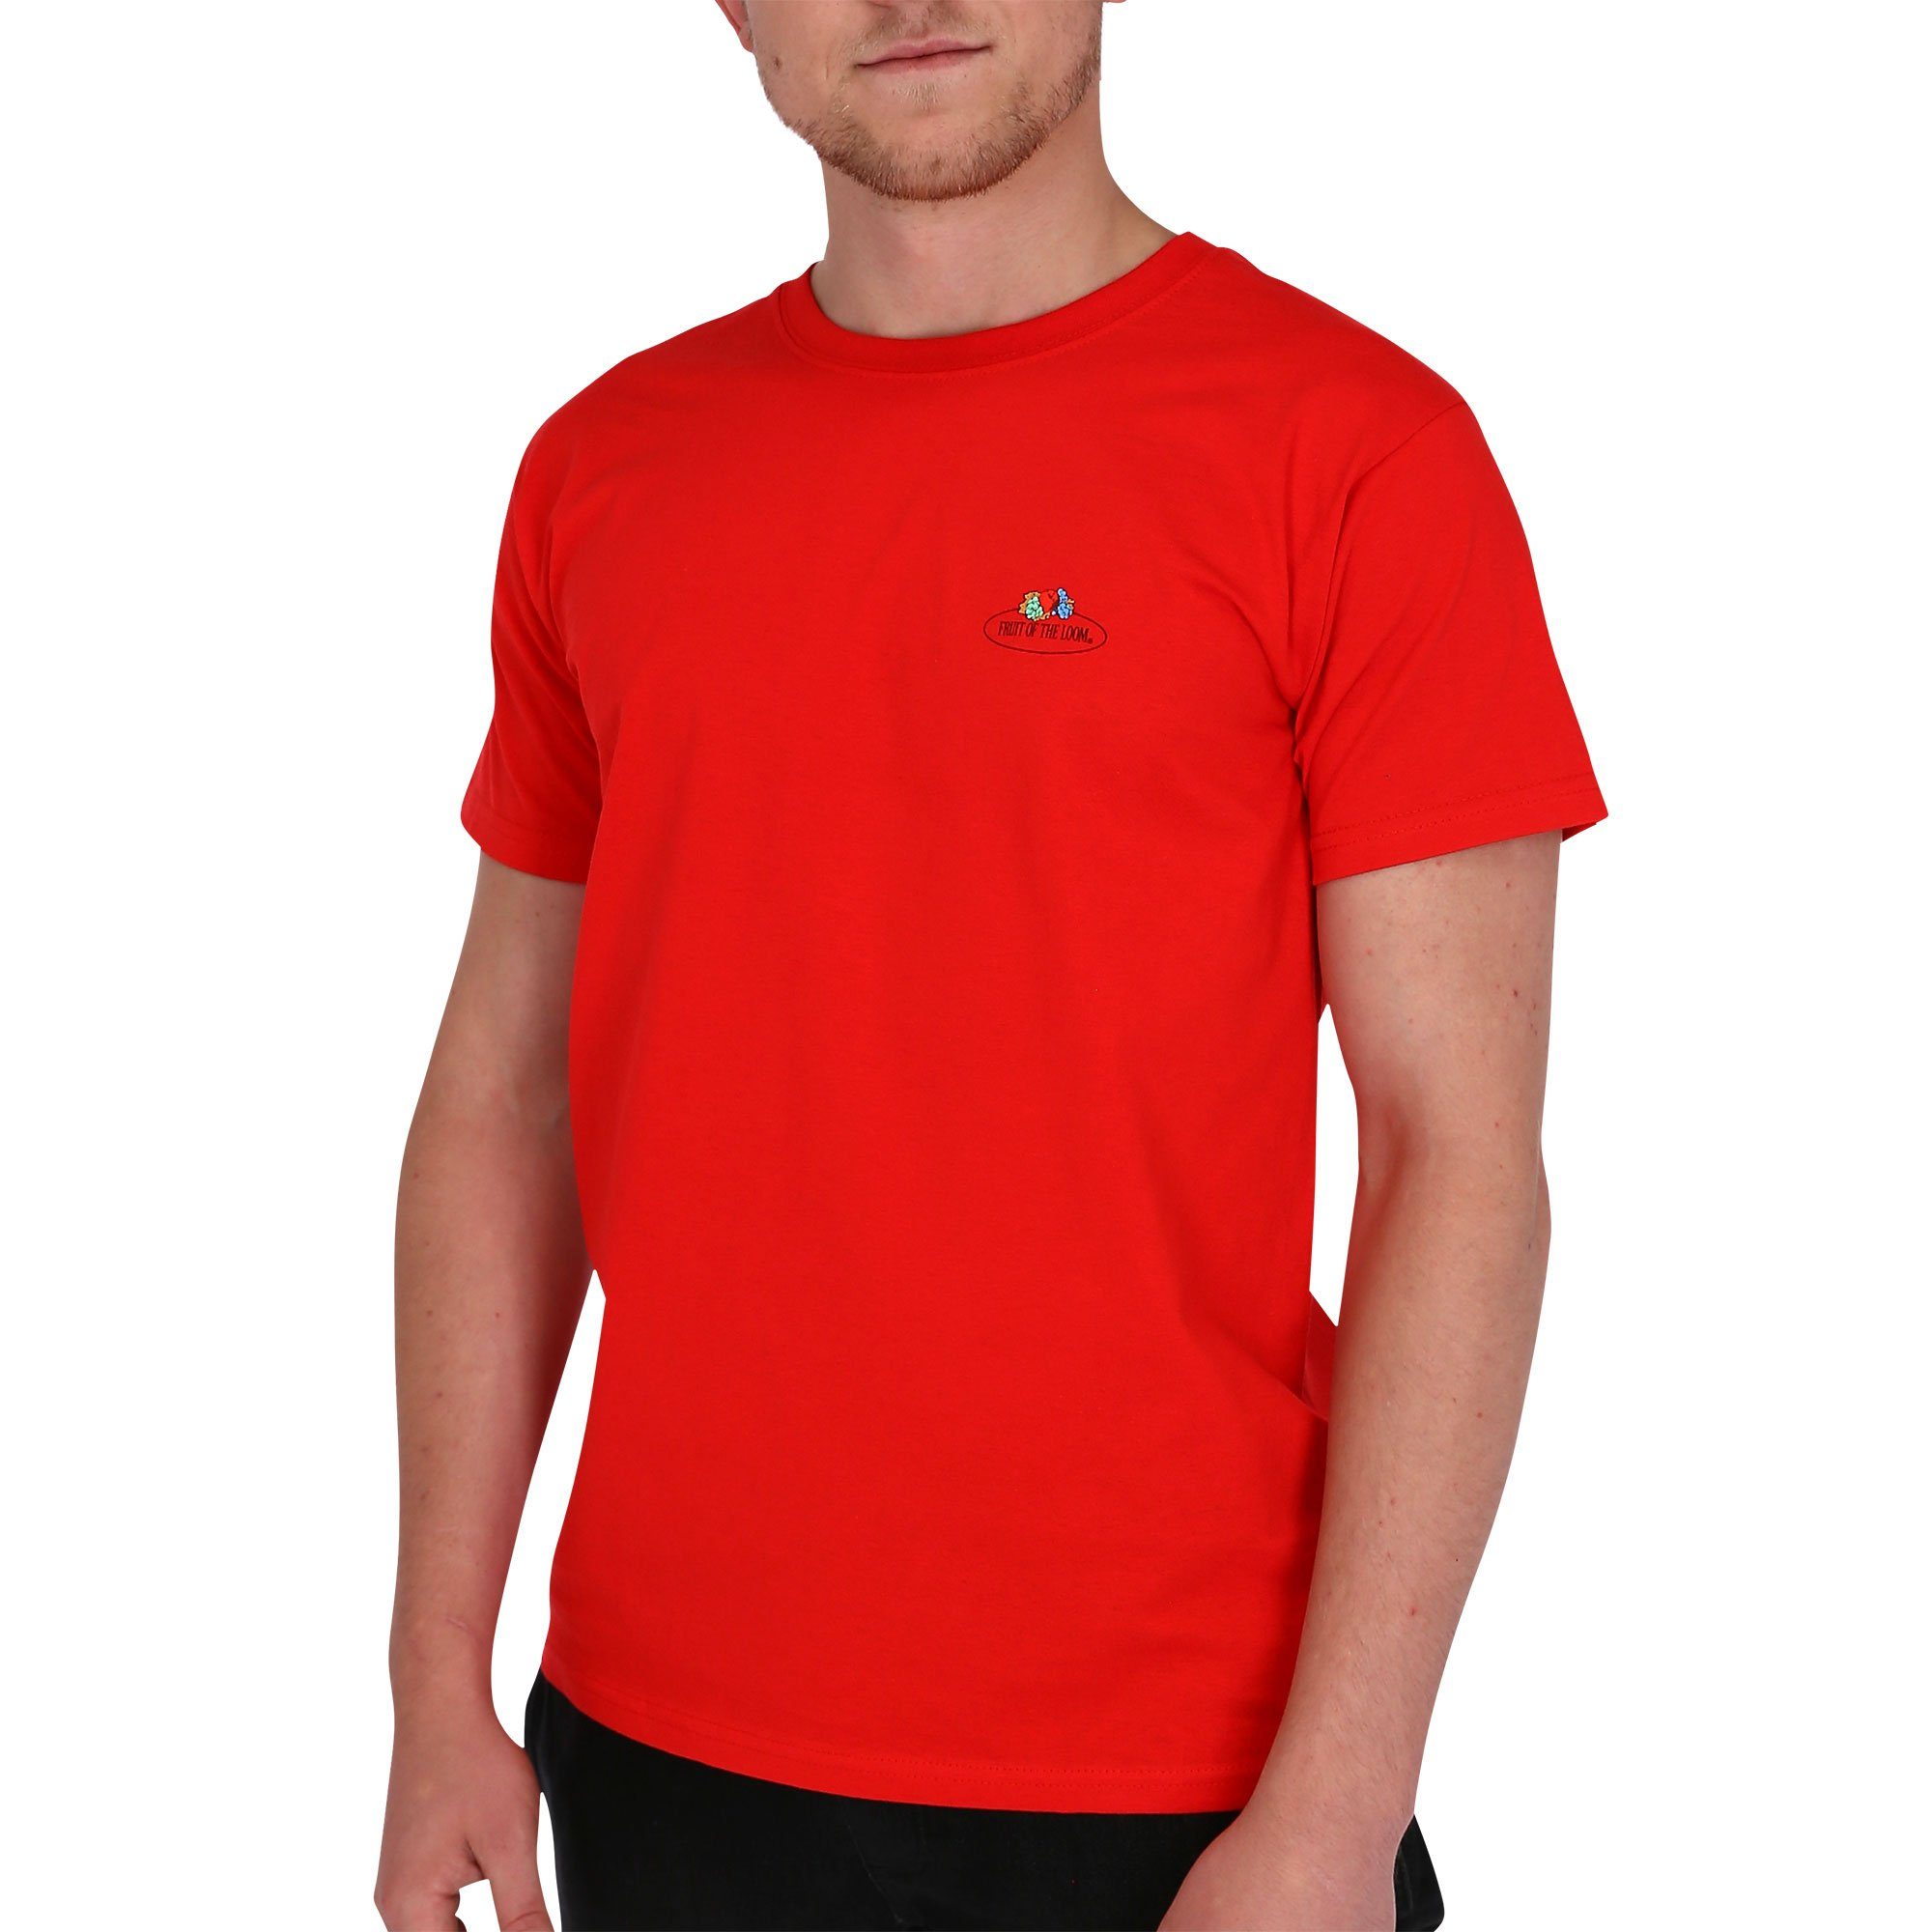 Fruit of the Loom Rundhalsshirt Valueweight T mit Vintage-Logo Rot (rot 40)